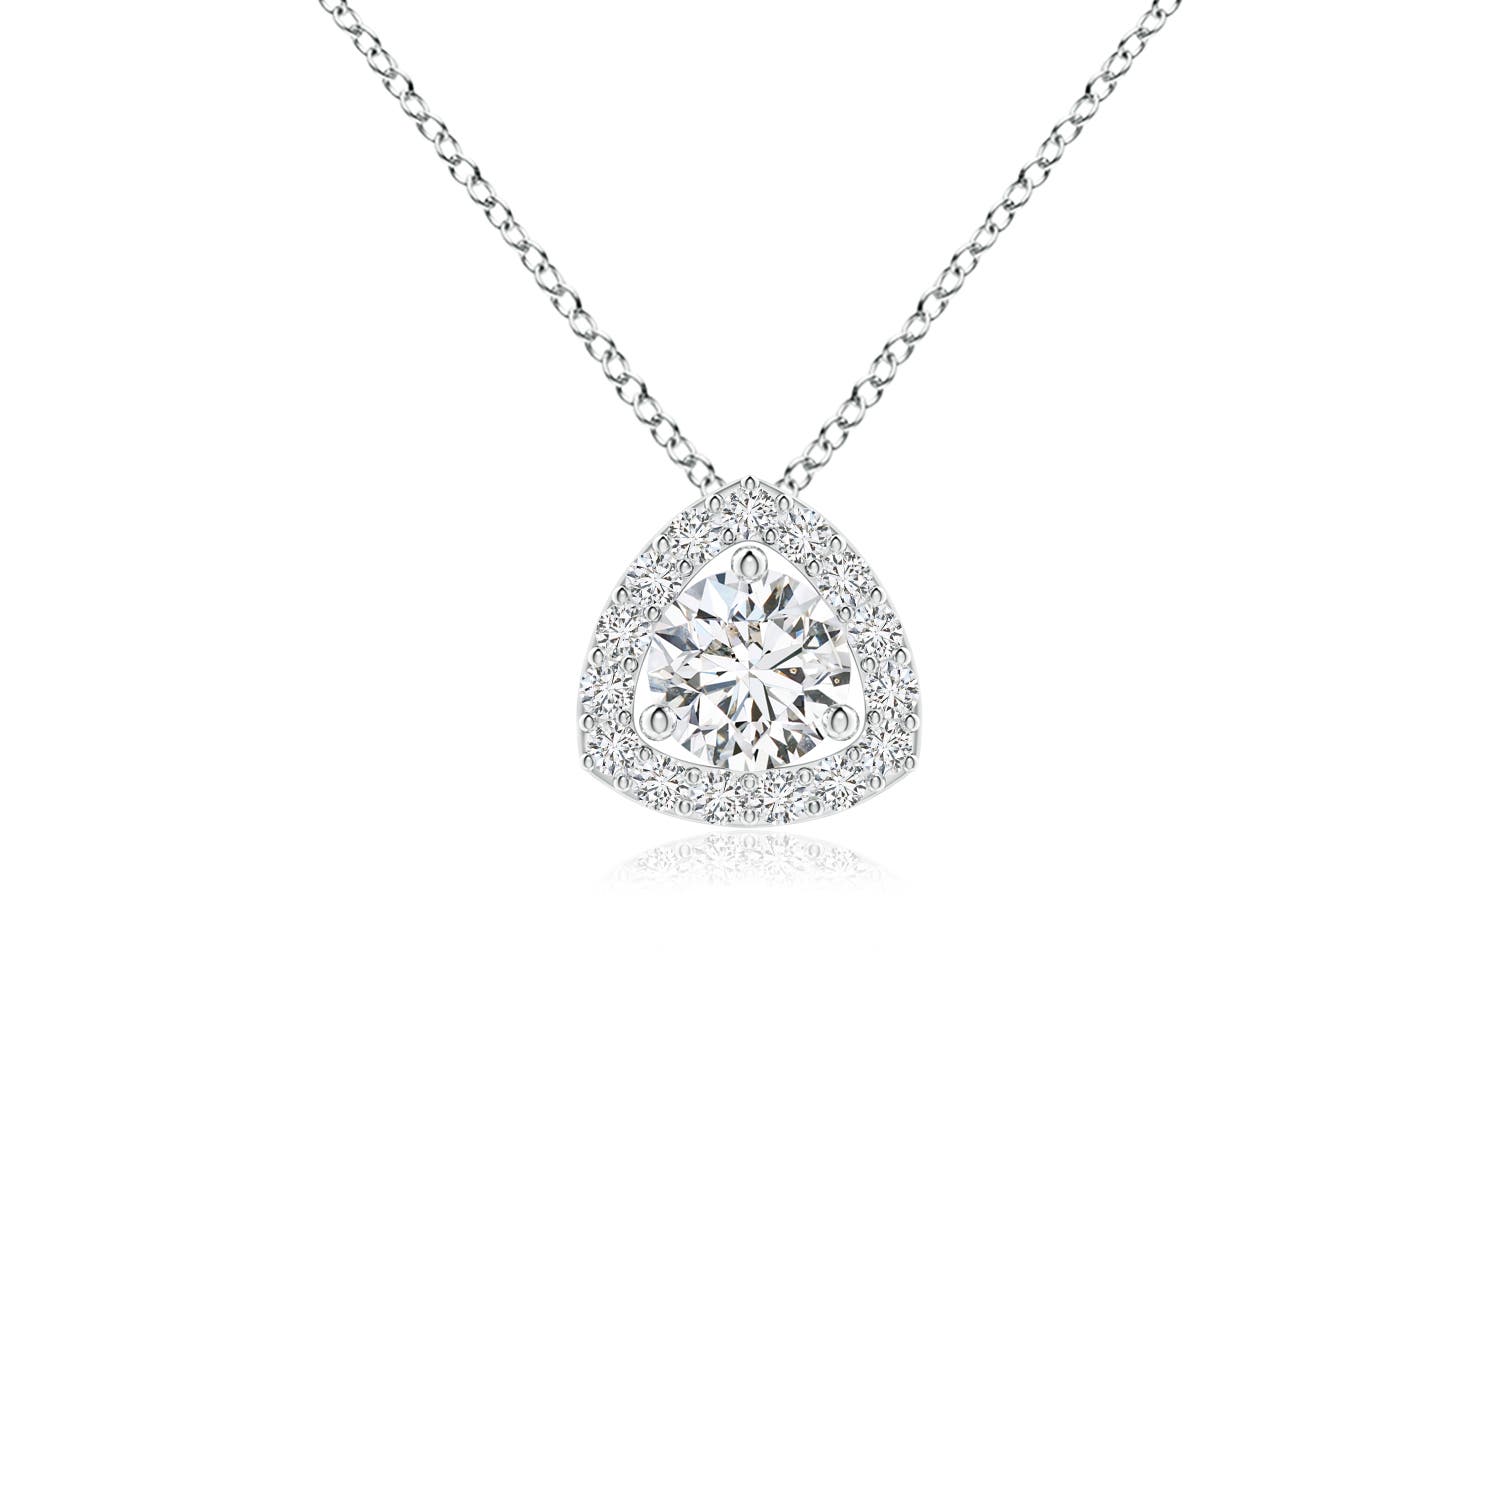 H, SI2 / 0.37 CT / 14 KT White Gold